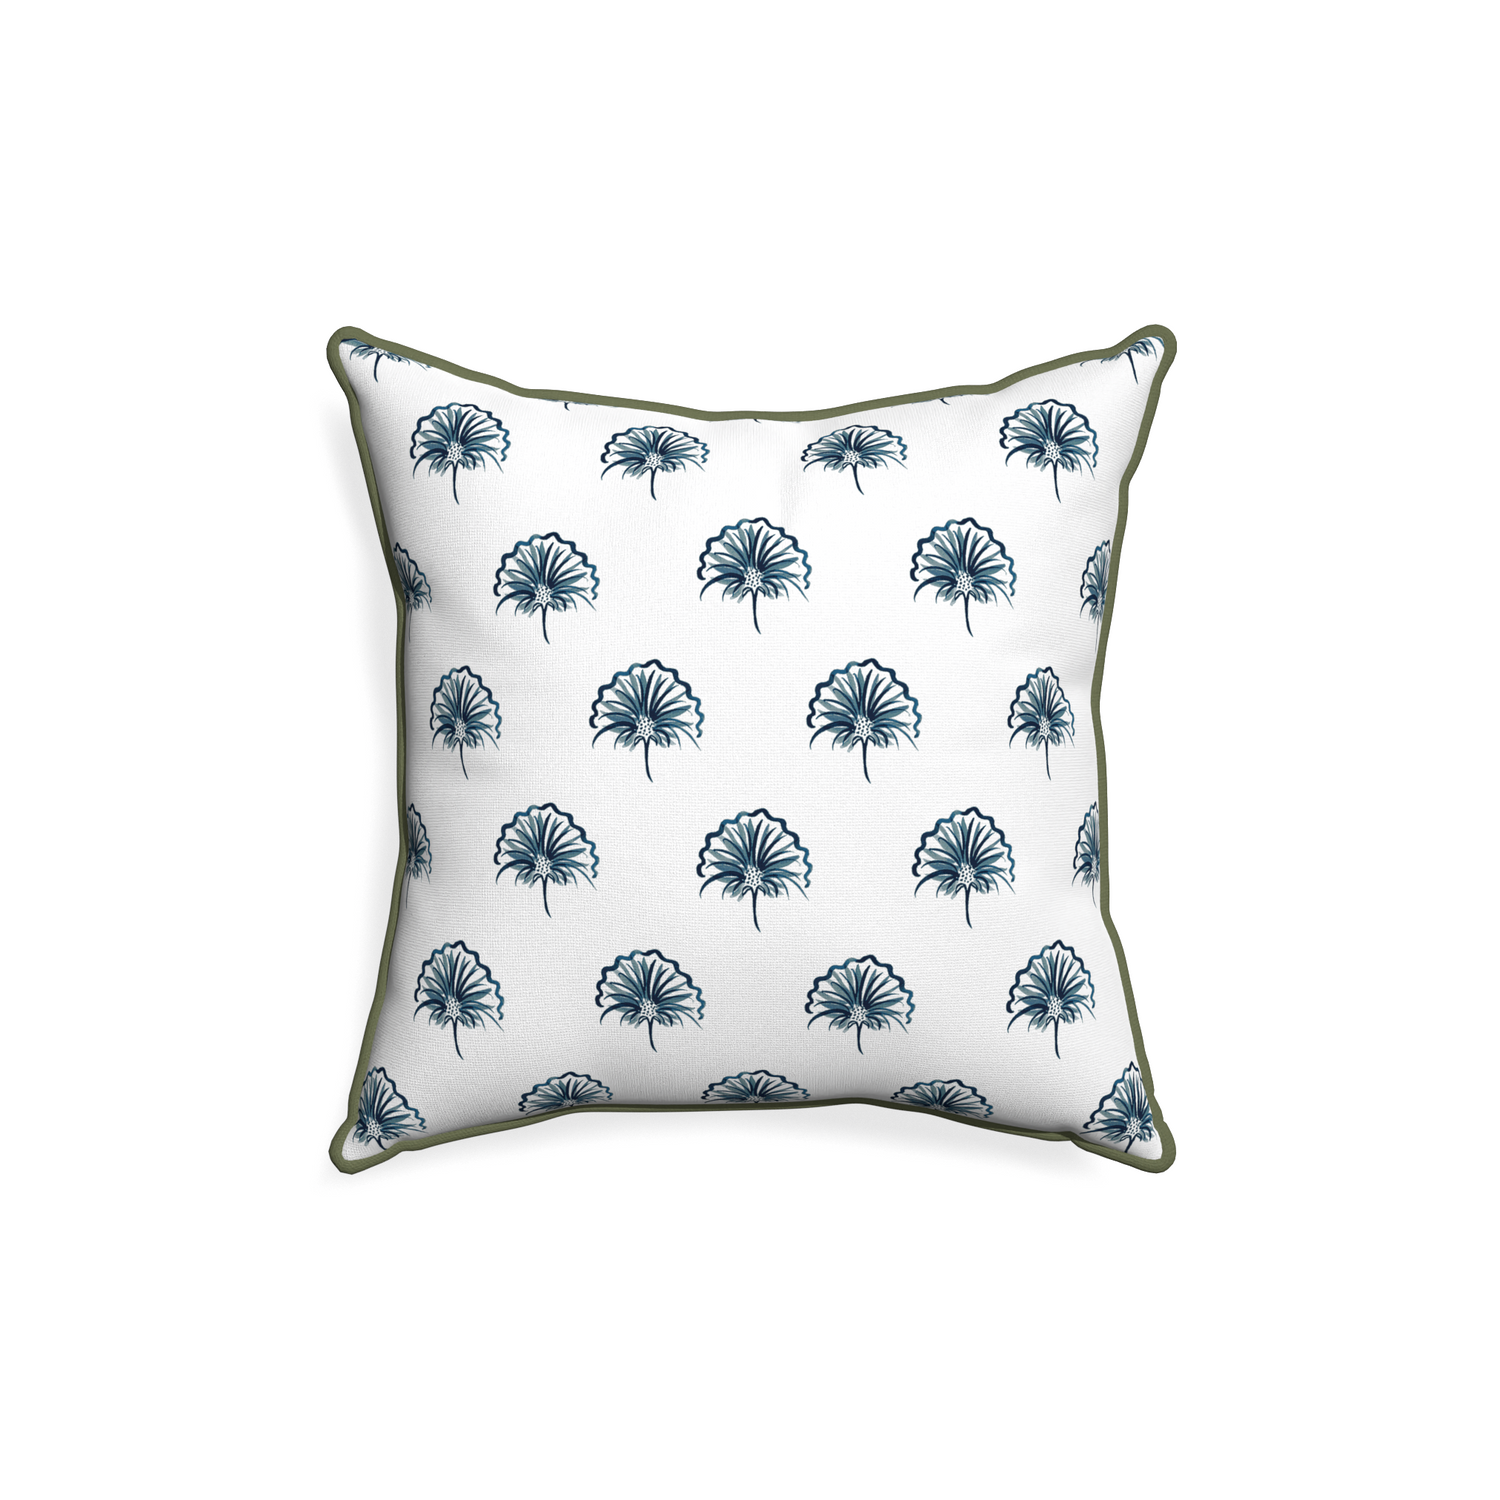 18-square penelope midnight custom floral navypillow with f piping on white background